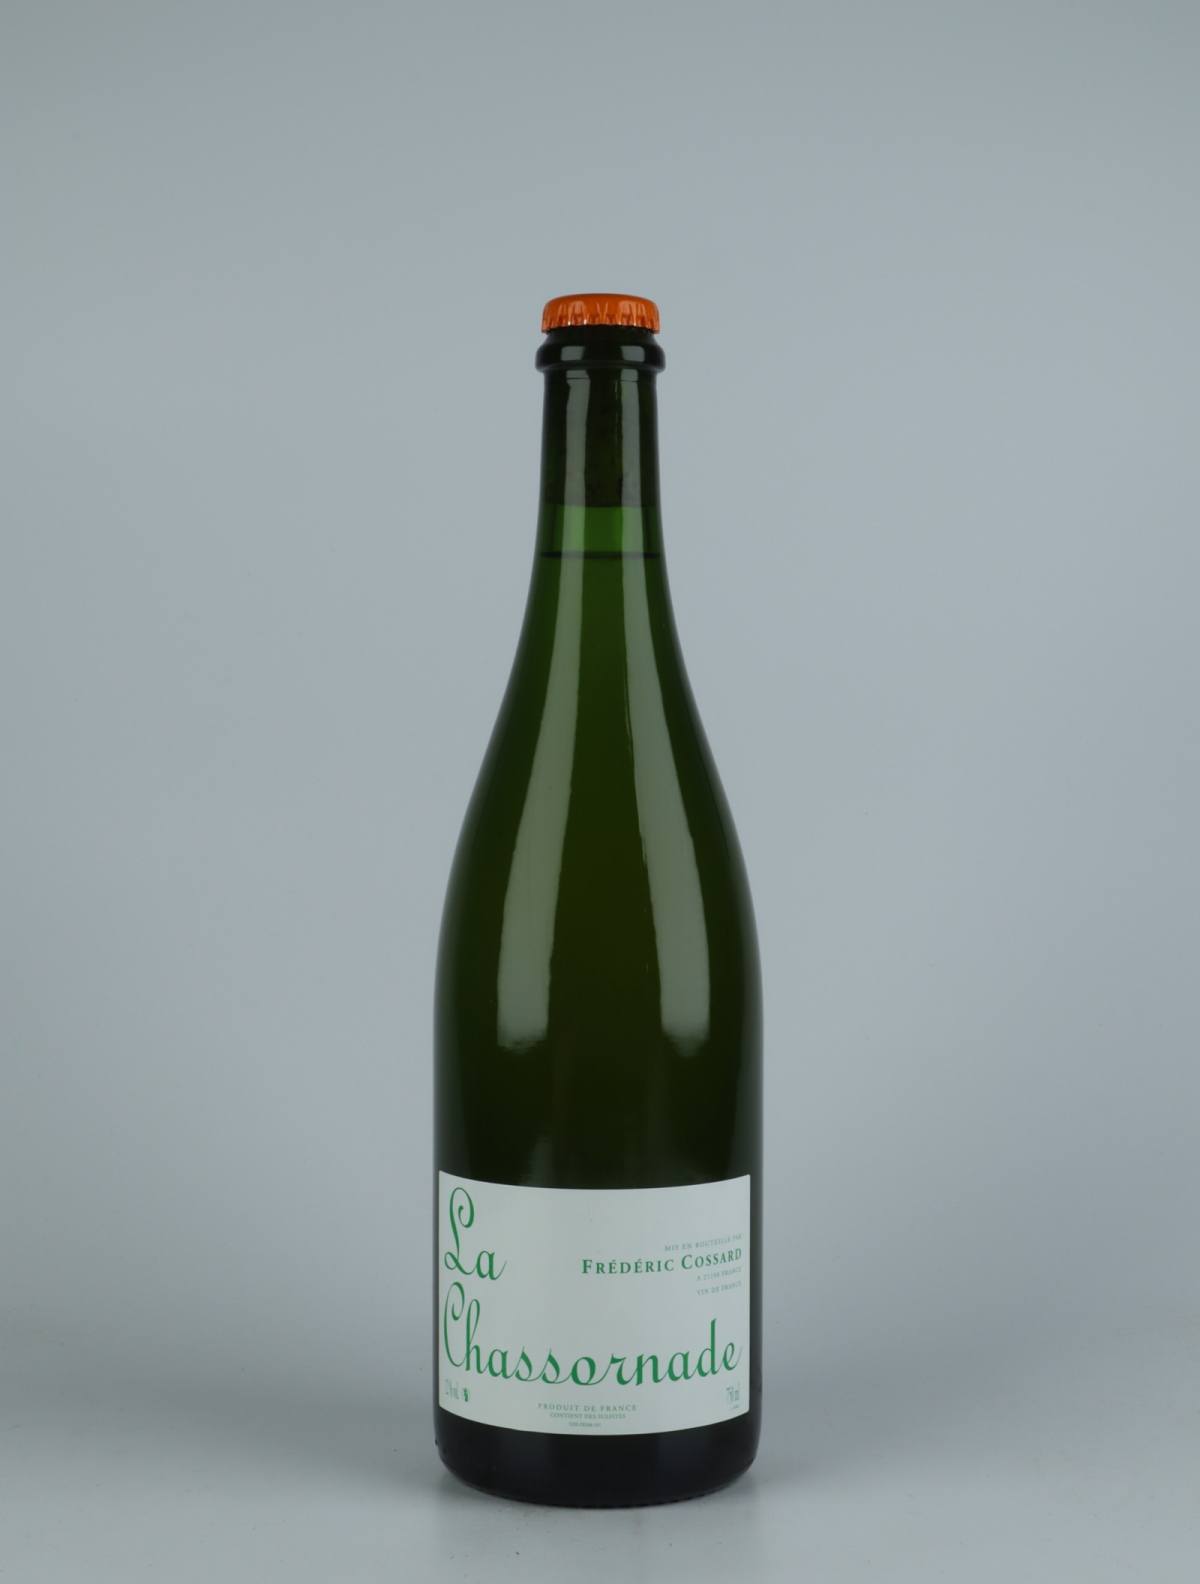 A bottle 2020 Chassornade Sparkling from Frédéric Cossard, Burgundy in France